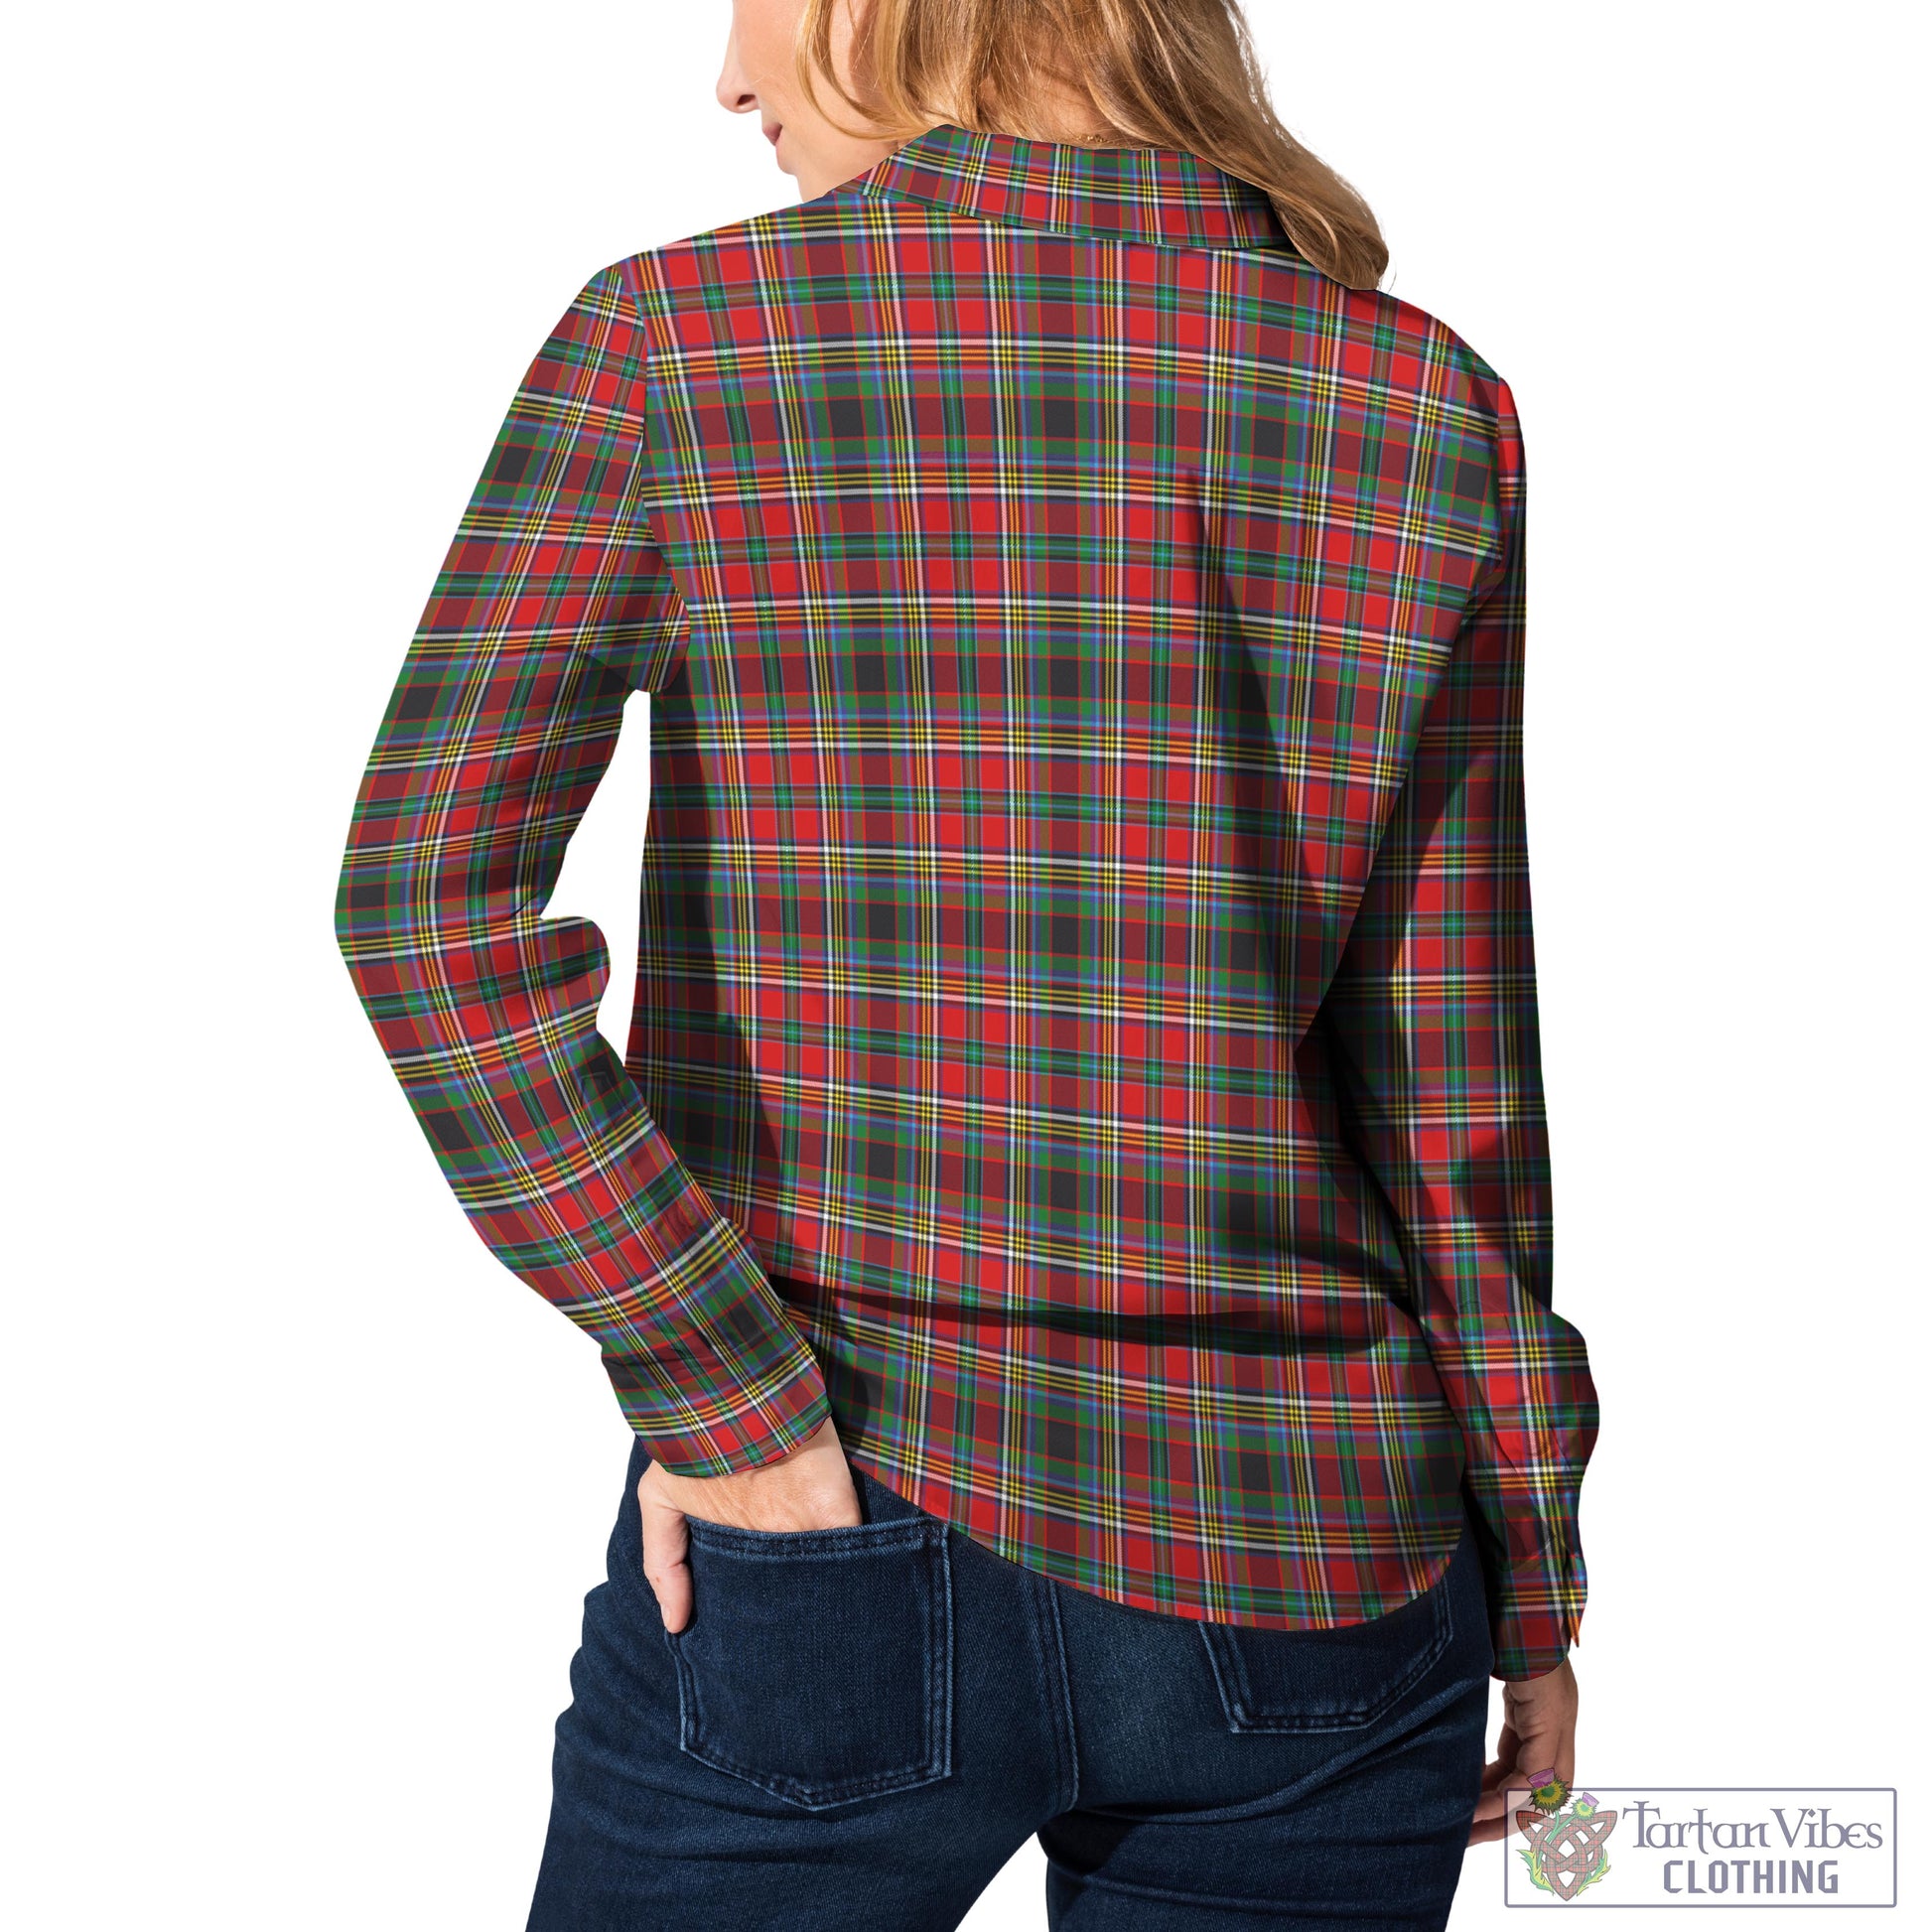 Tartan Vibes Clothing Anderson of Arbrake Tartan Womens Casual Shirt with Family Crest